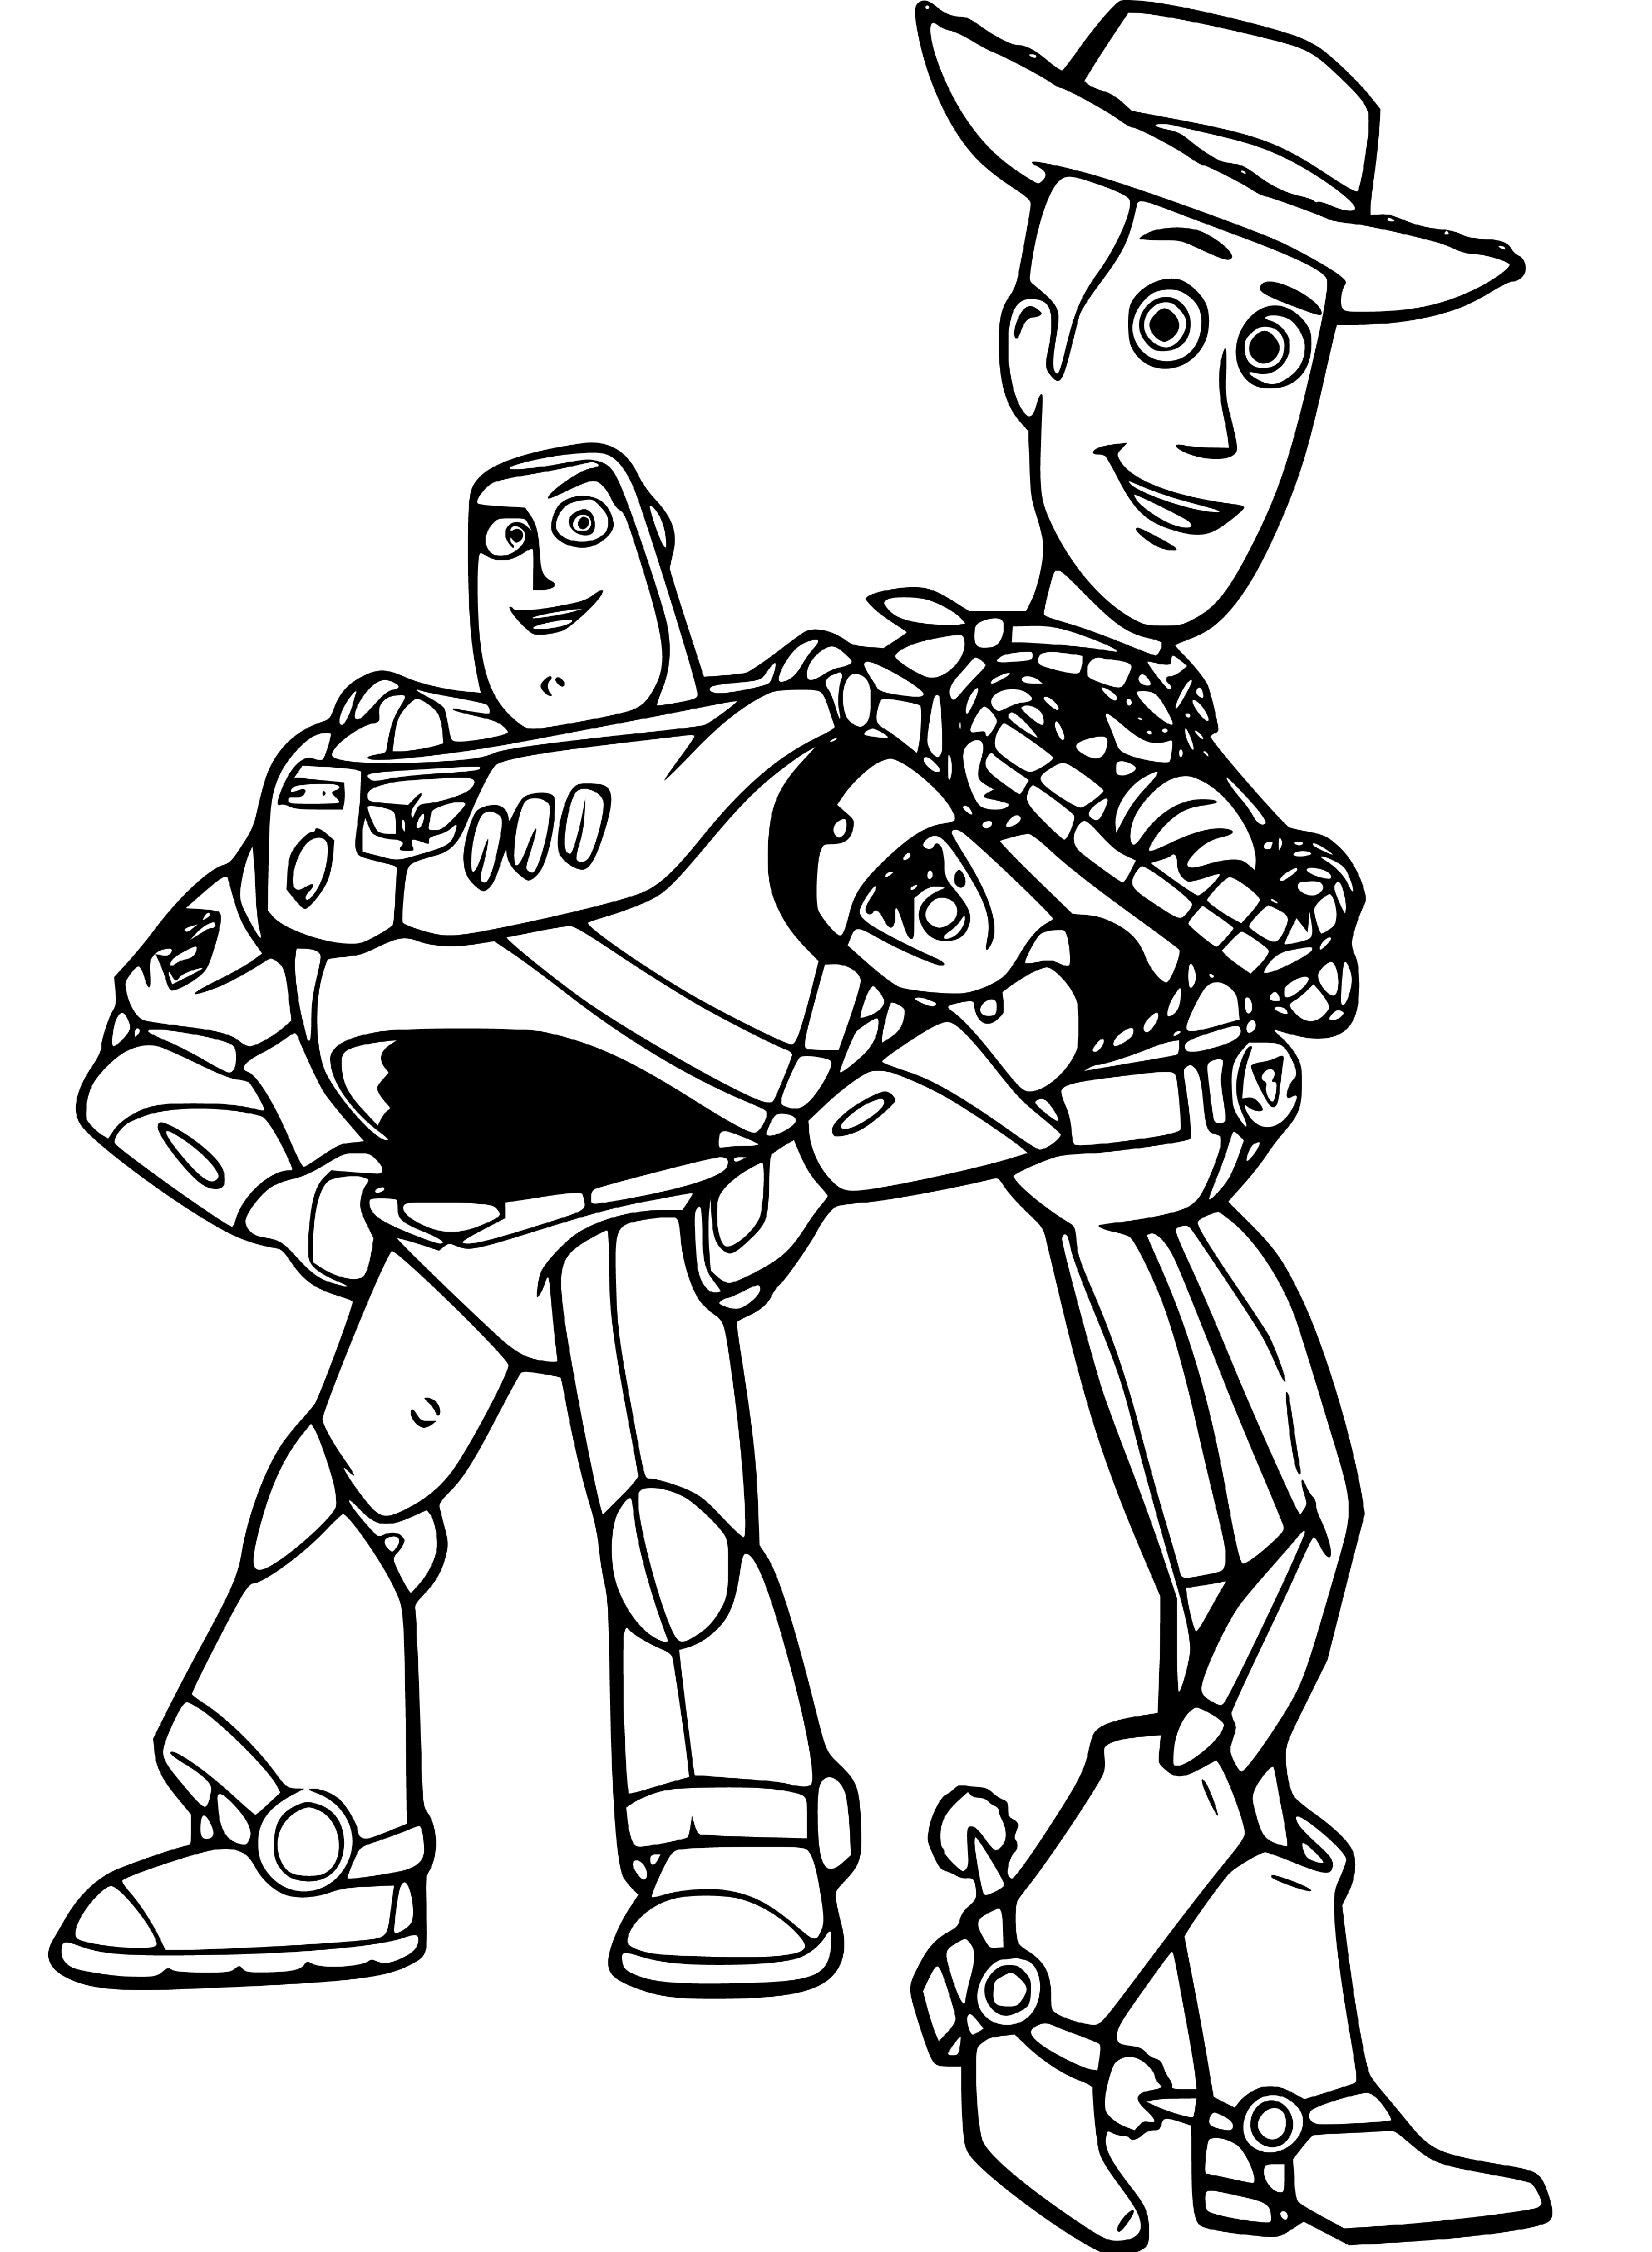 Toy Story: Buzz Lightyear and Woody Coloring sheets - SheetalColor.com